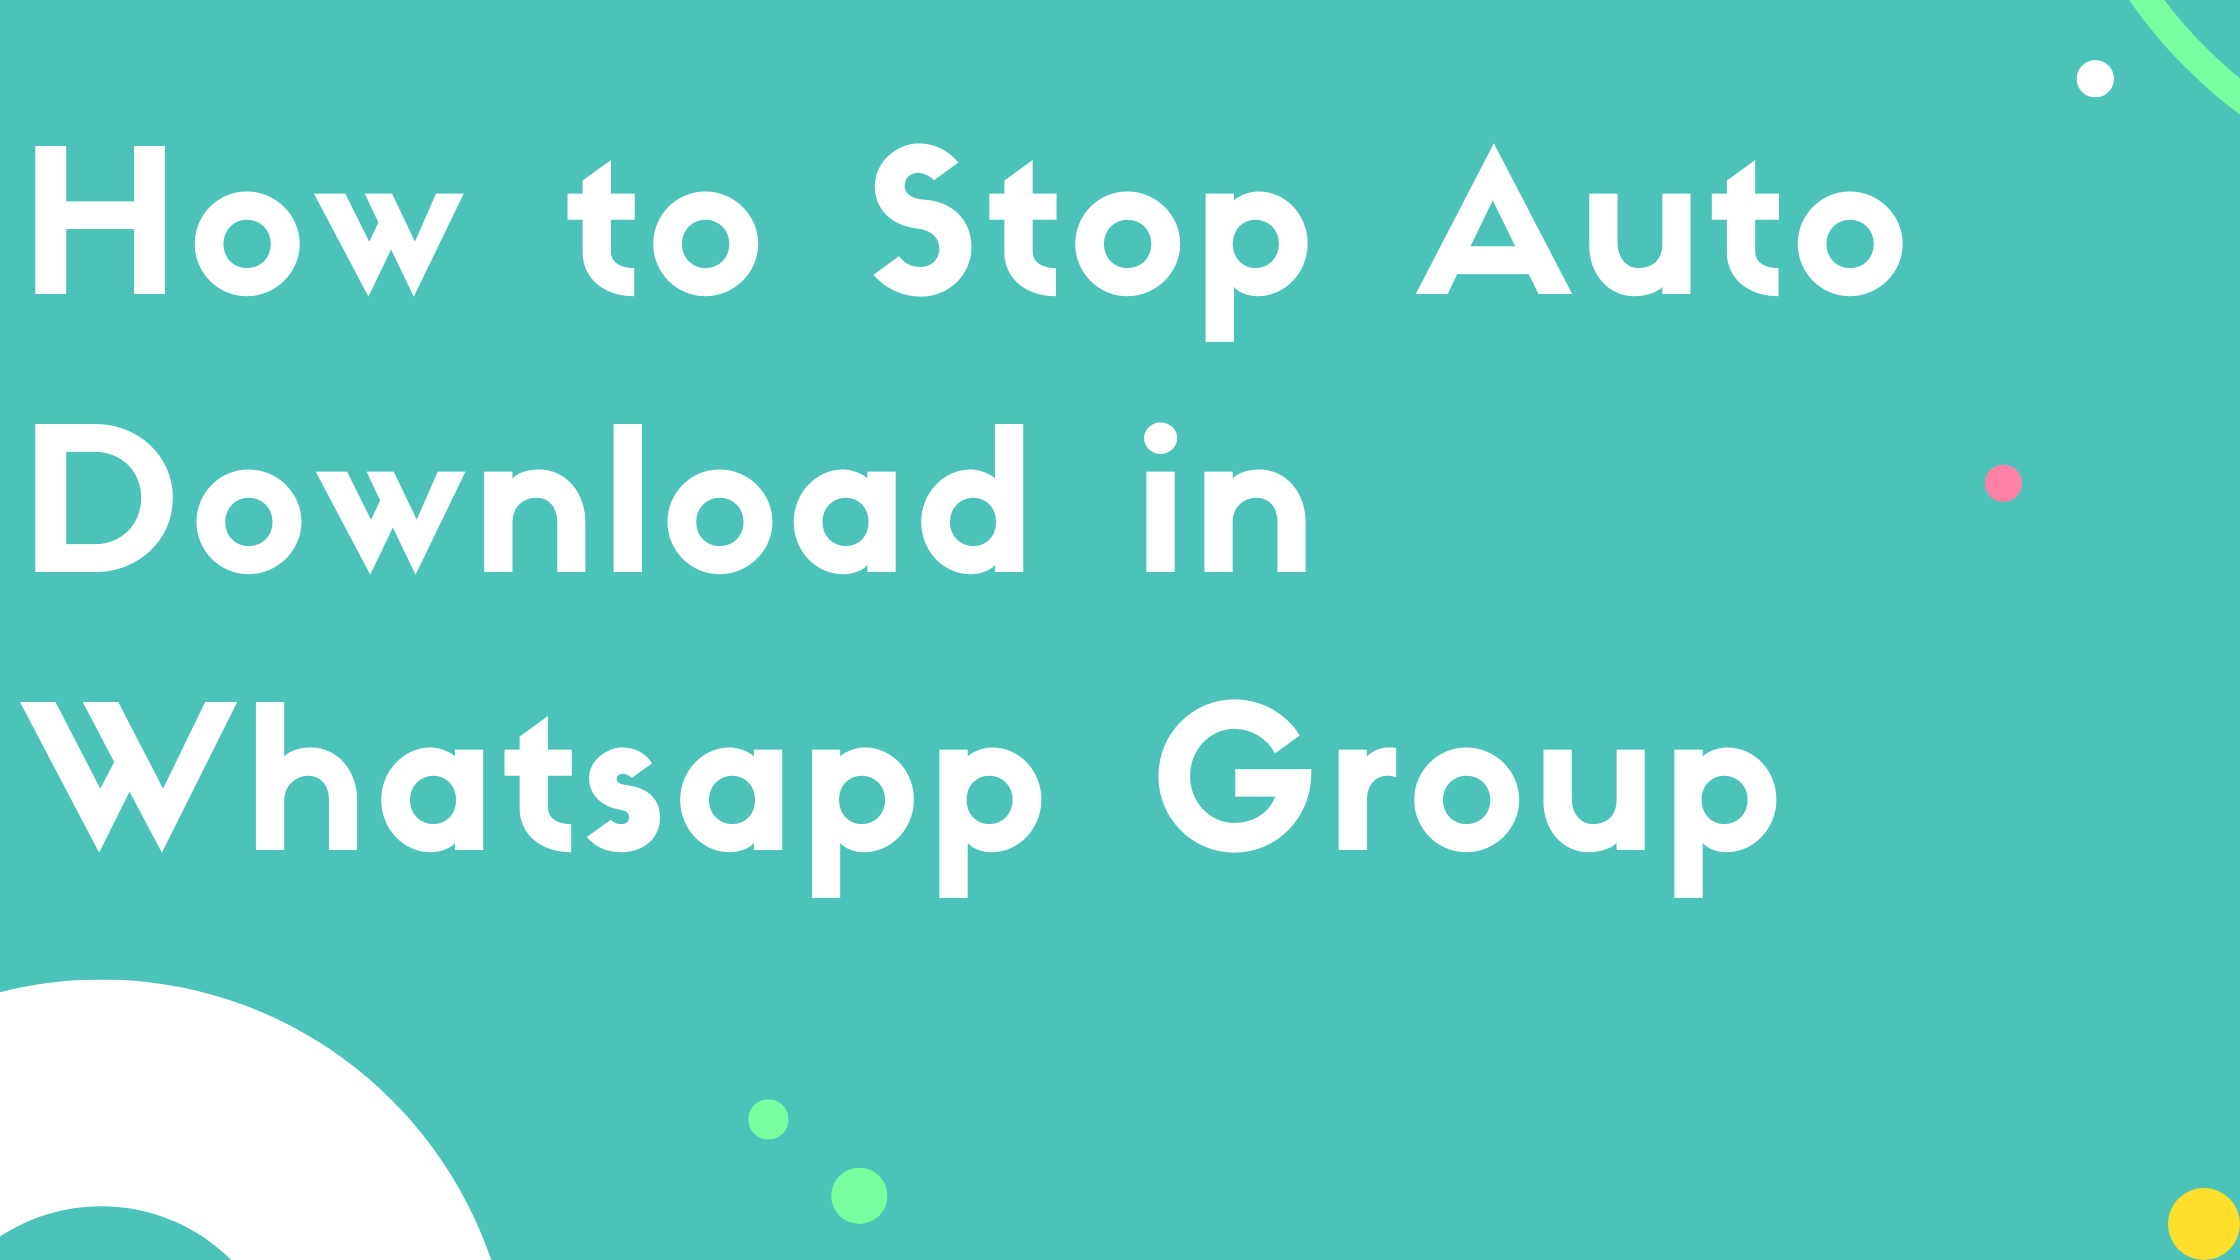 How to Stop Auto Download in Whatsapp Group